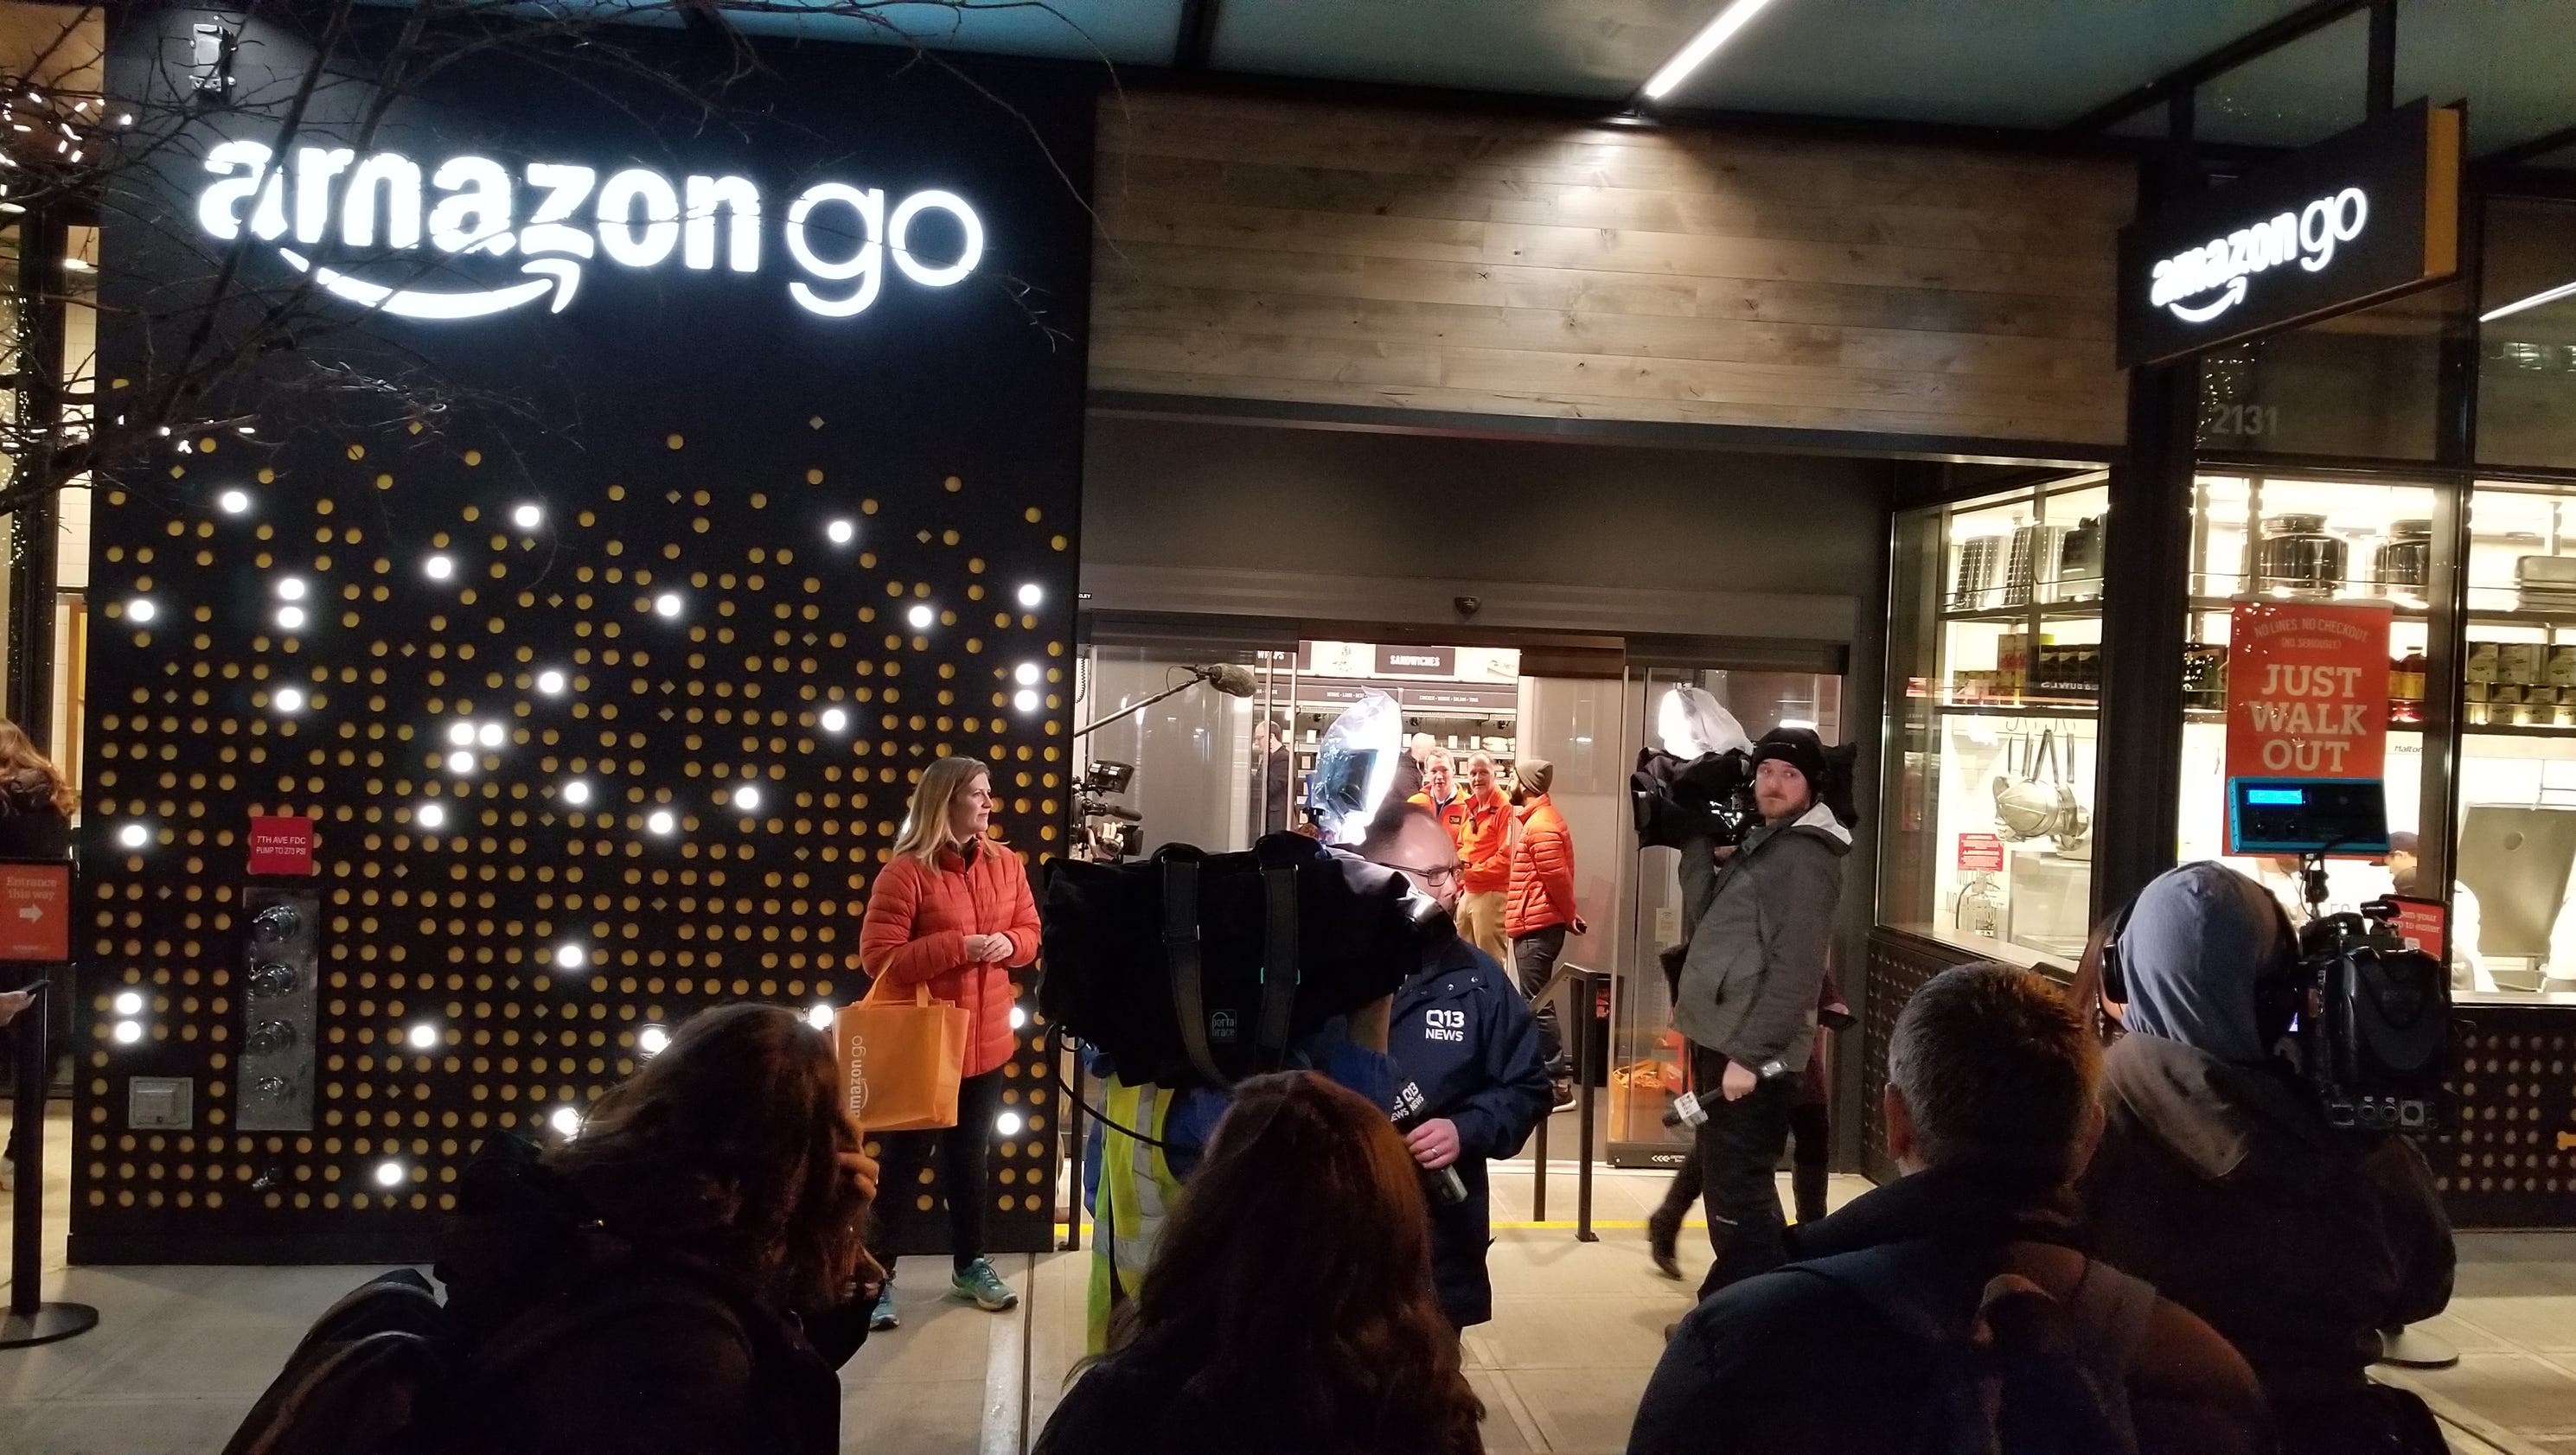 Amazon Go: Lines form in Seattle to try checkout-free shopping